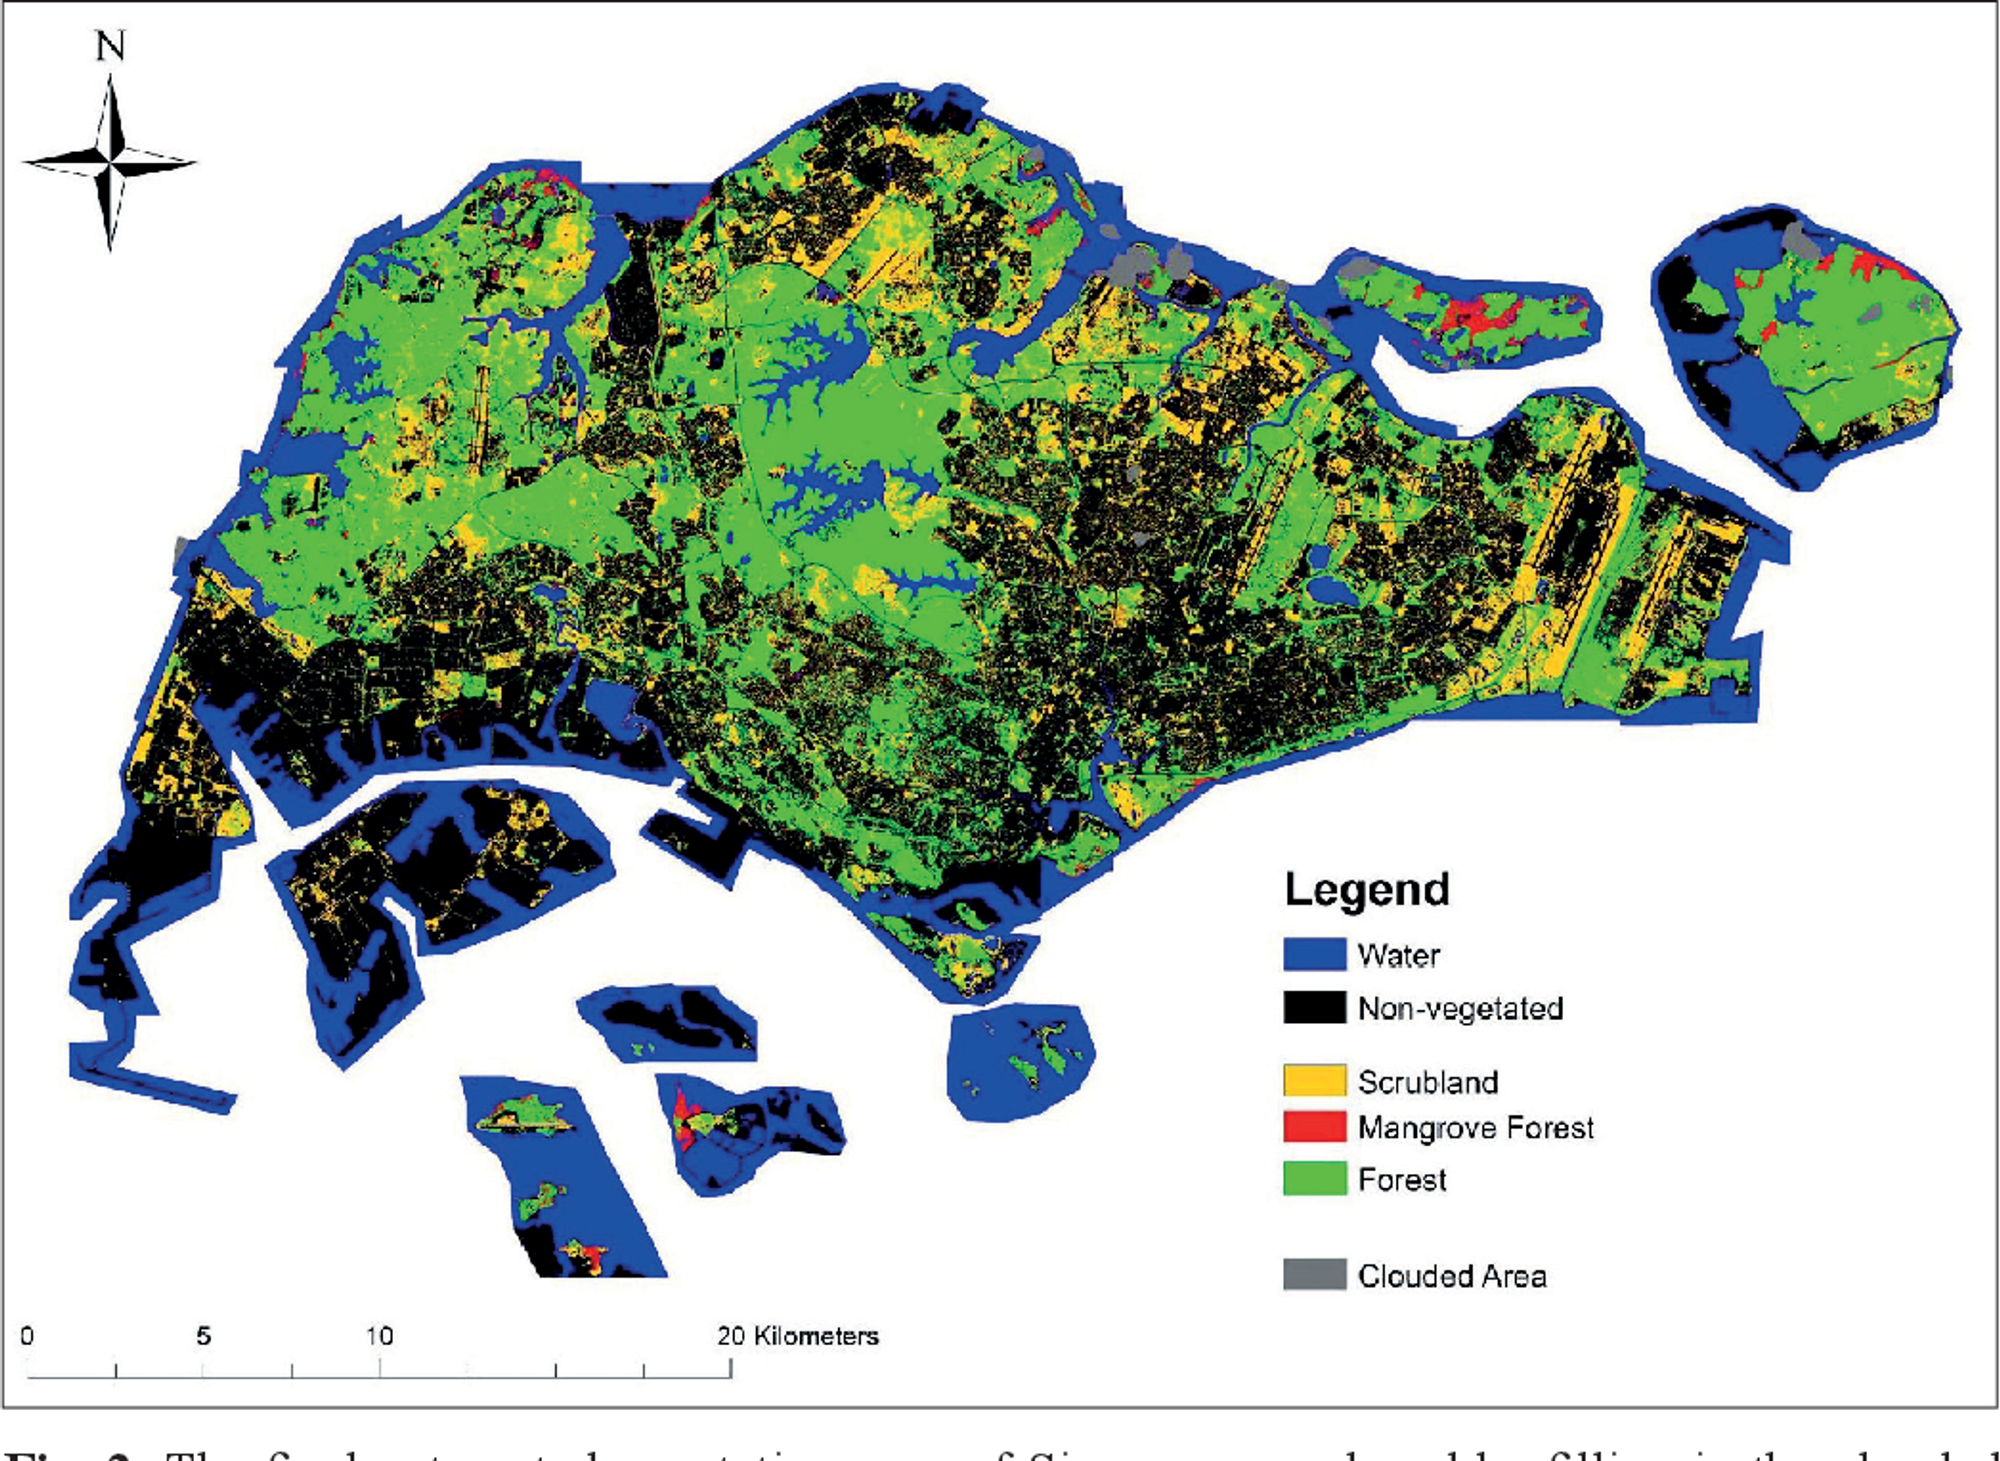 Singapore Vegetation Map - with Mangrove forrests